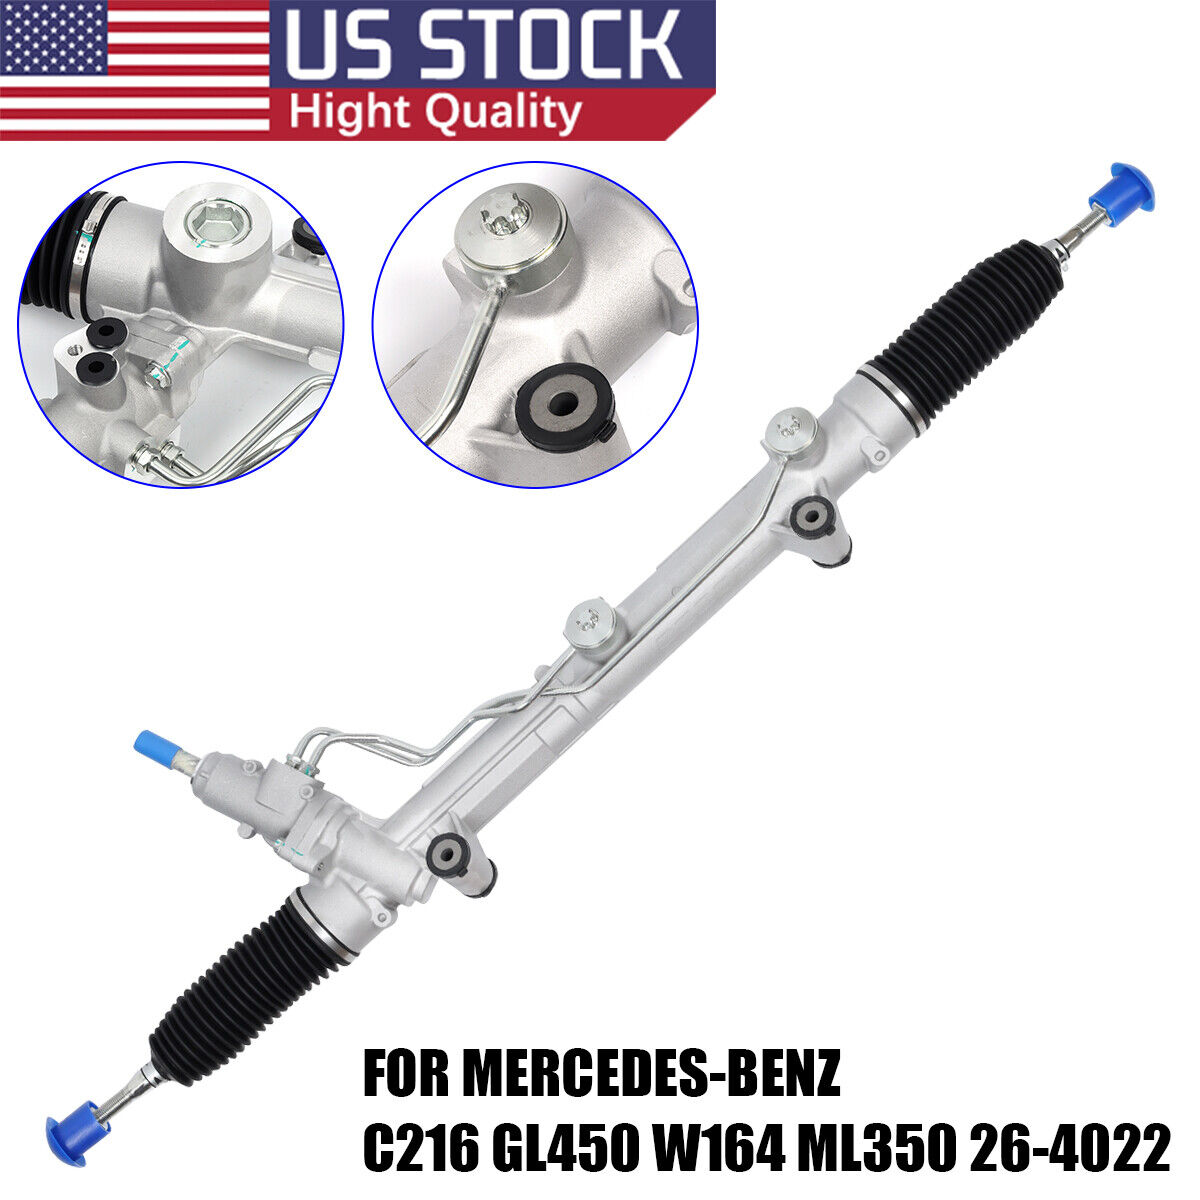 Power Steering Rack & Pinion Assembly for Mercedes-Benz C216 GL450 W164 ML350